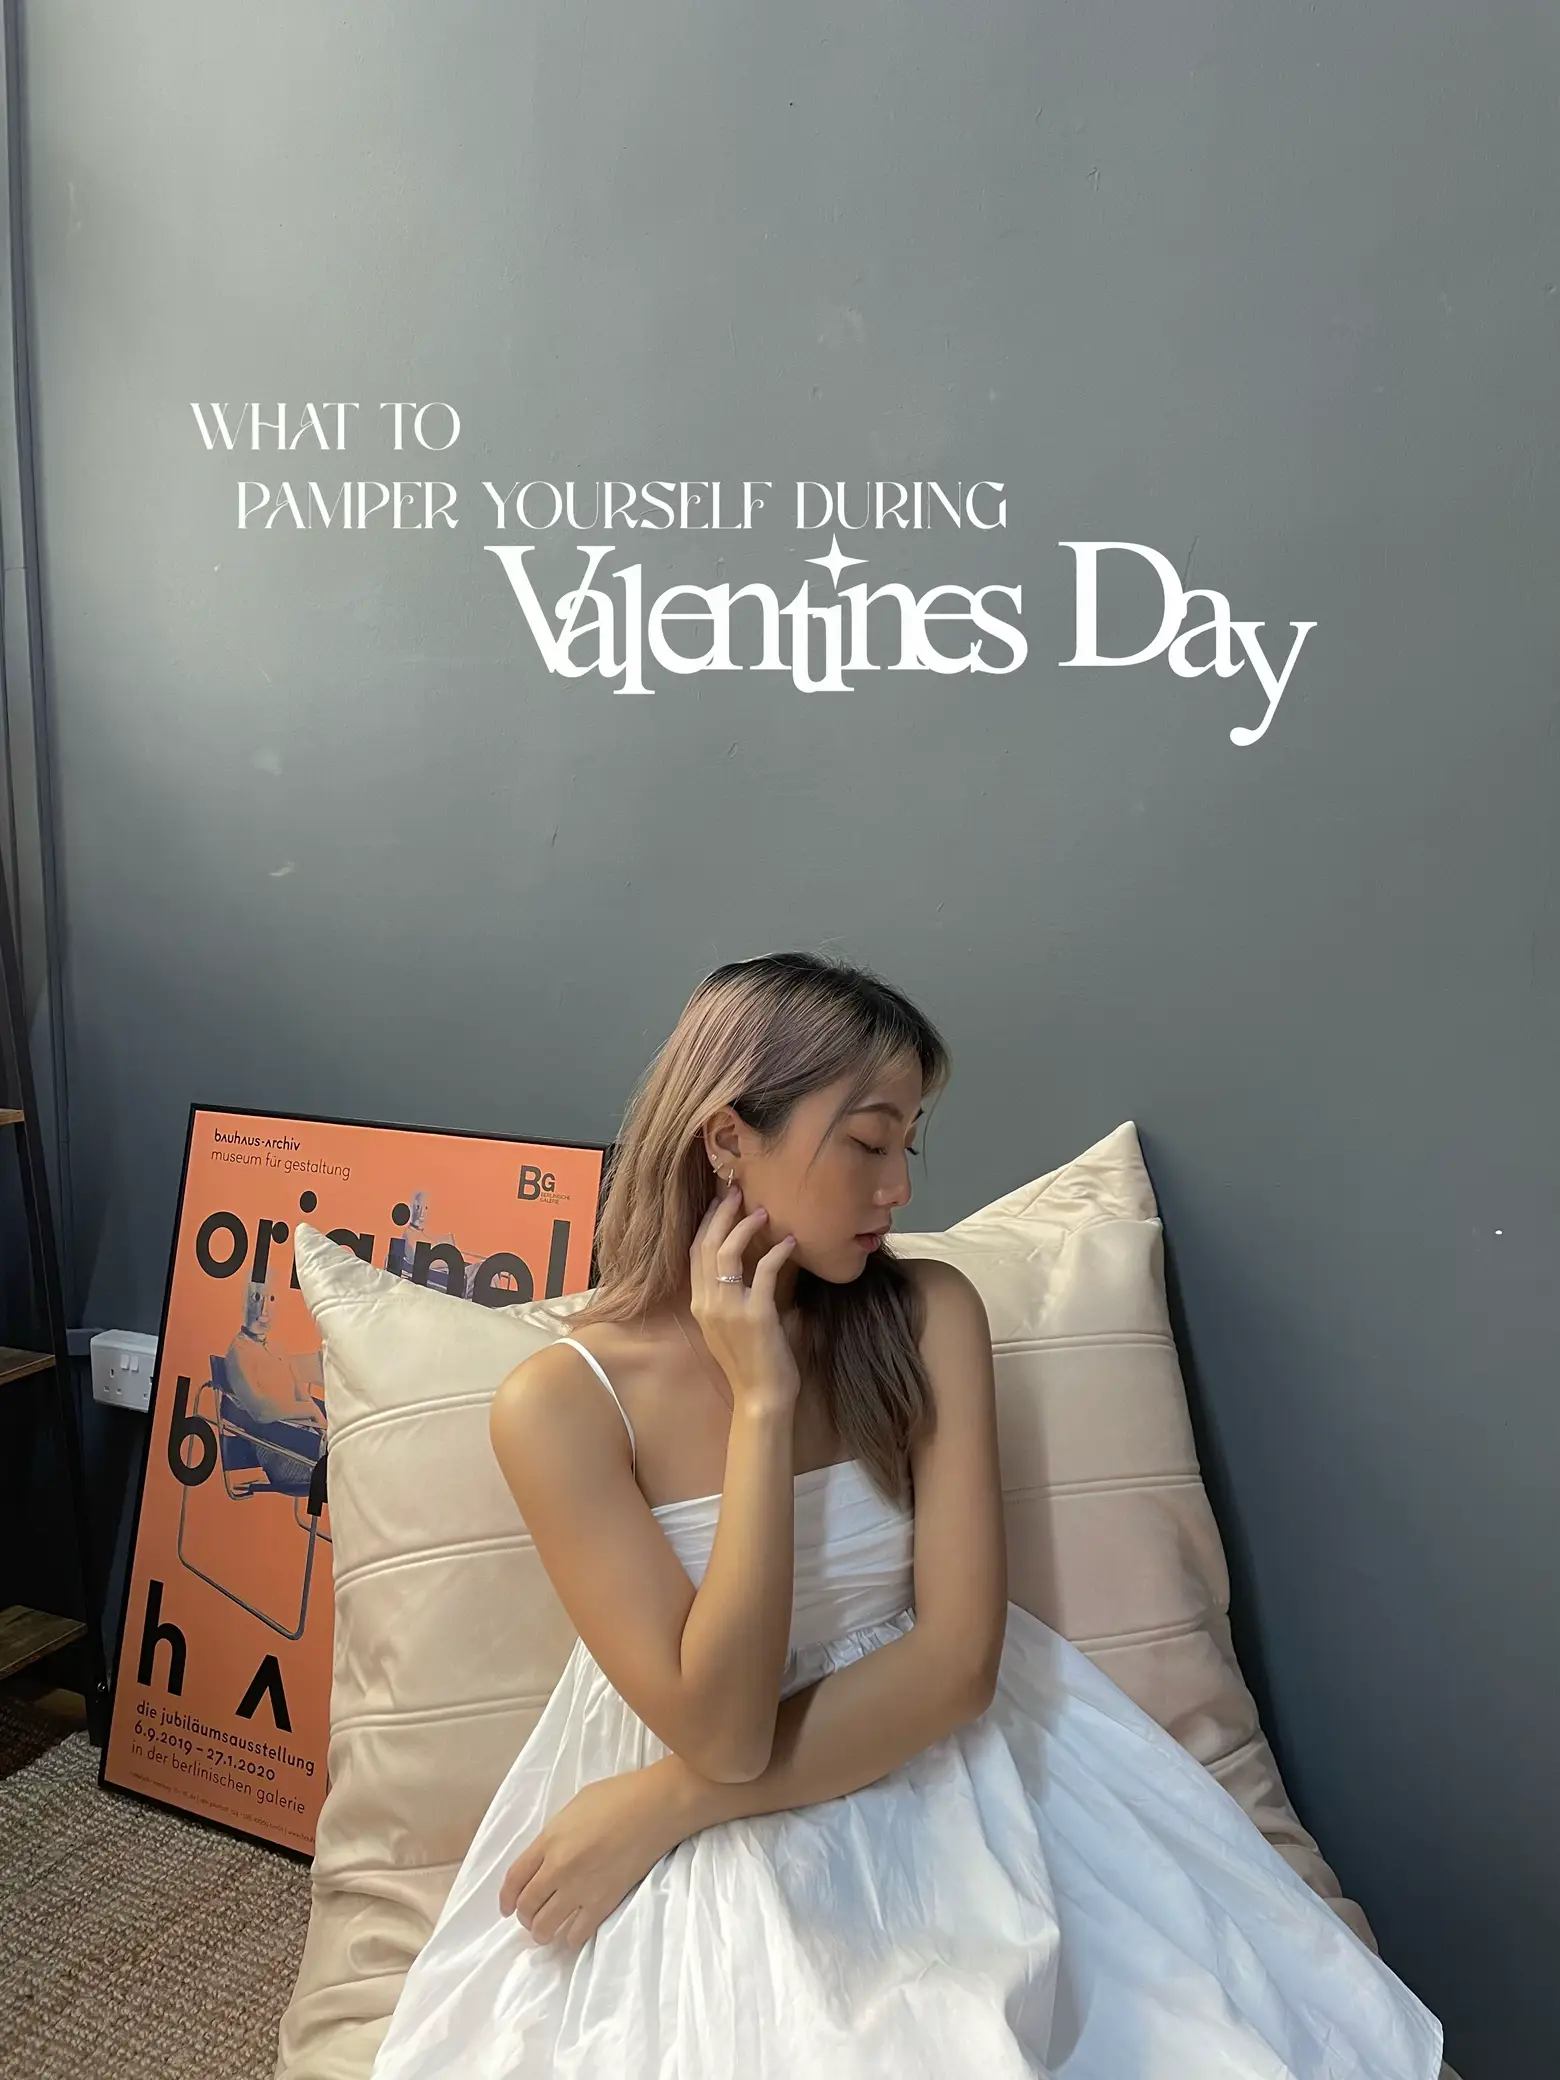 How to pamper yourself this Valentine's Day